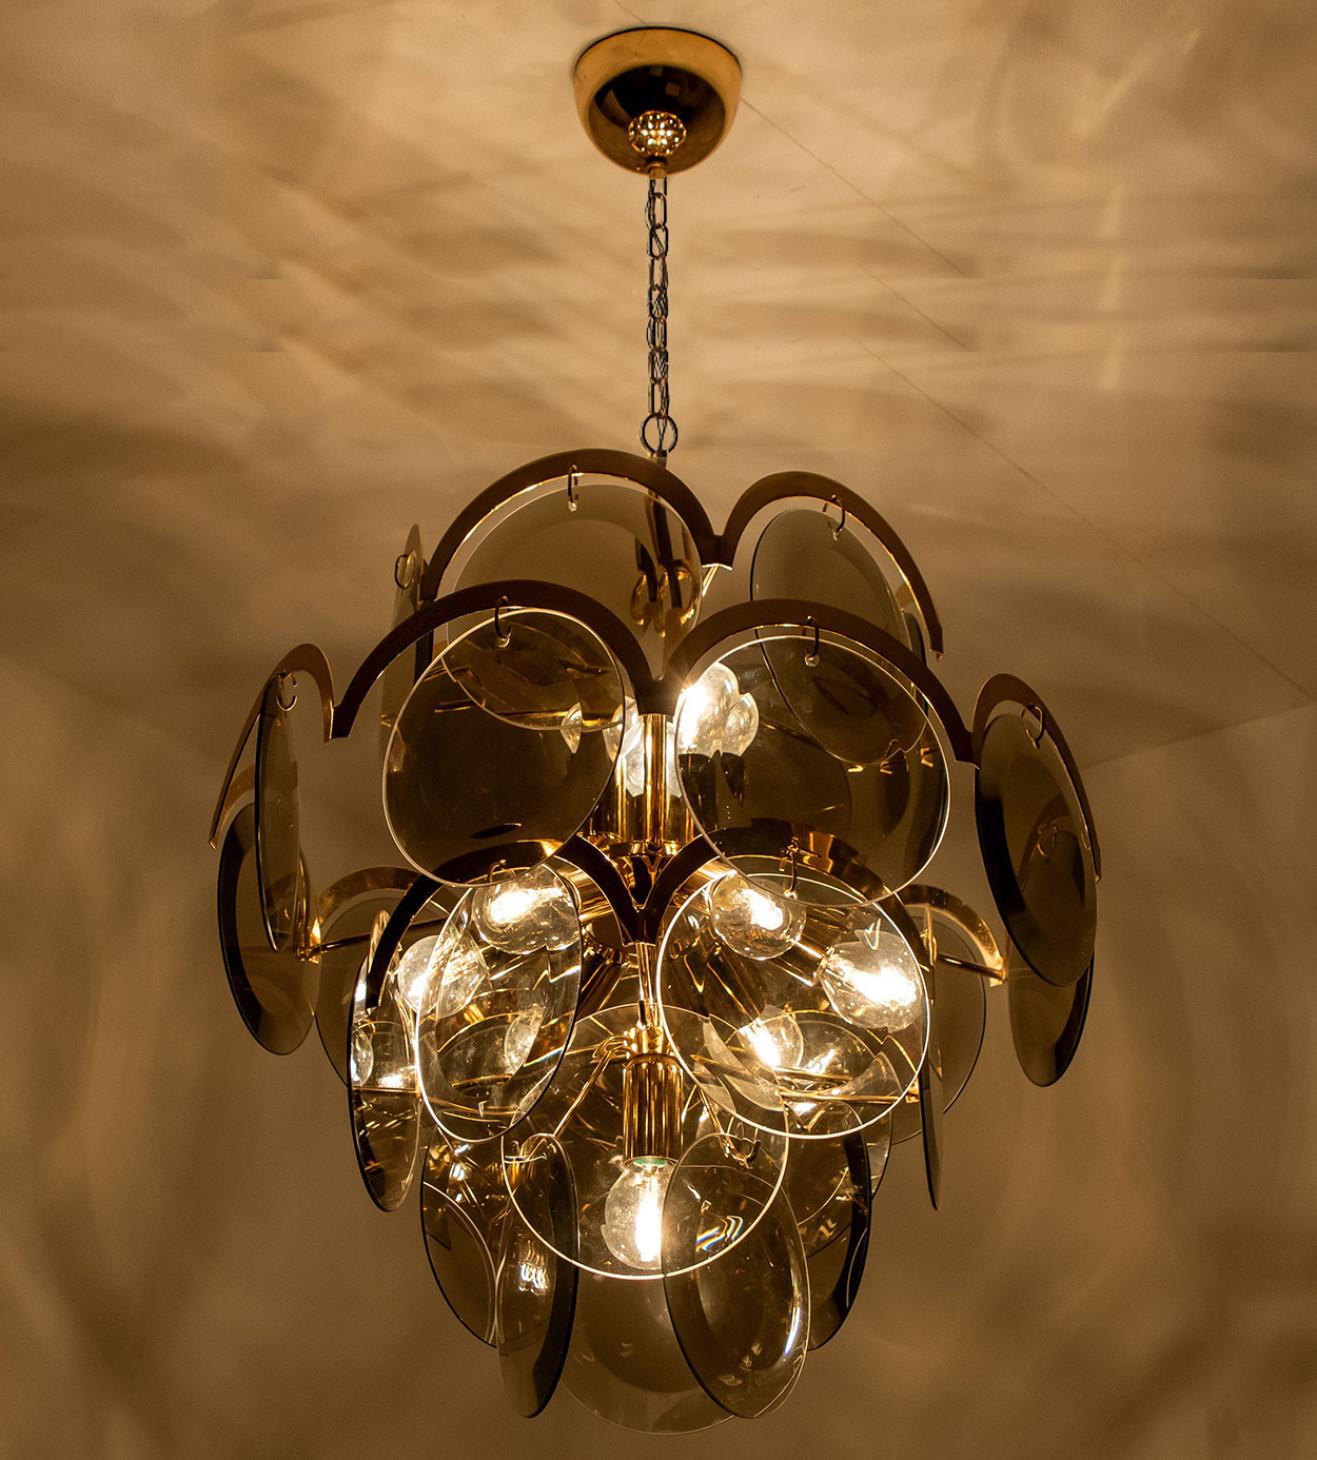 Pair of Smoked Glass and Brass Chandelier in style of Vistosi, Italy, 1970s For Sale 9